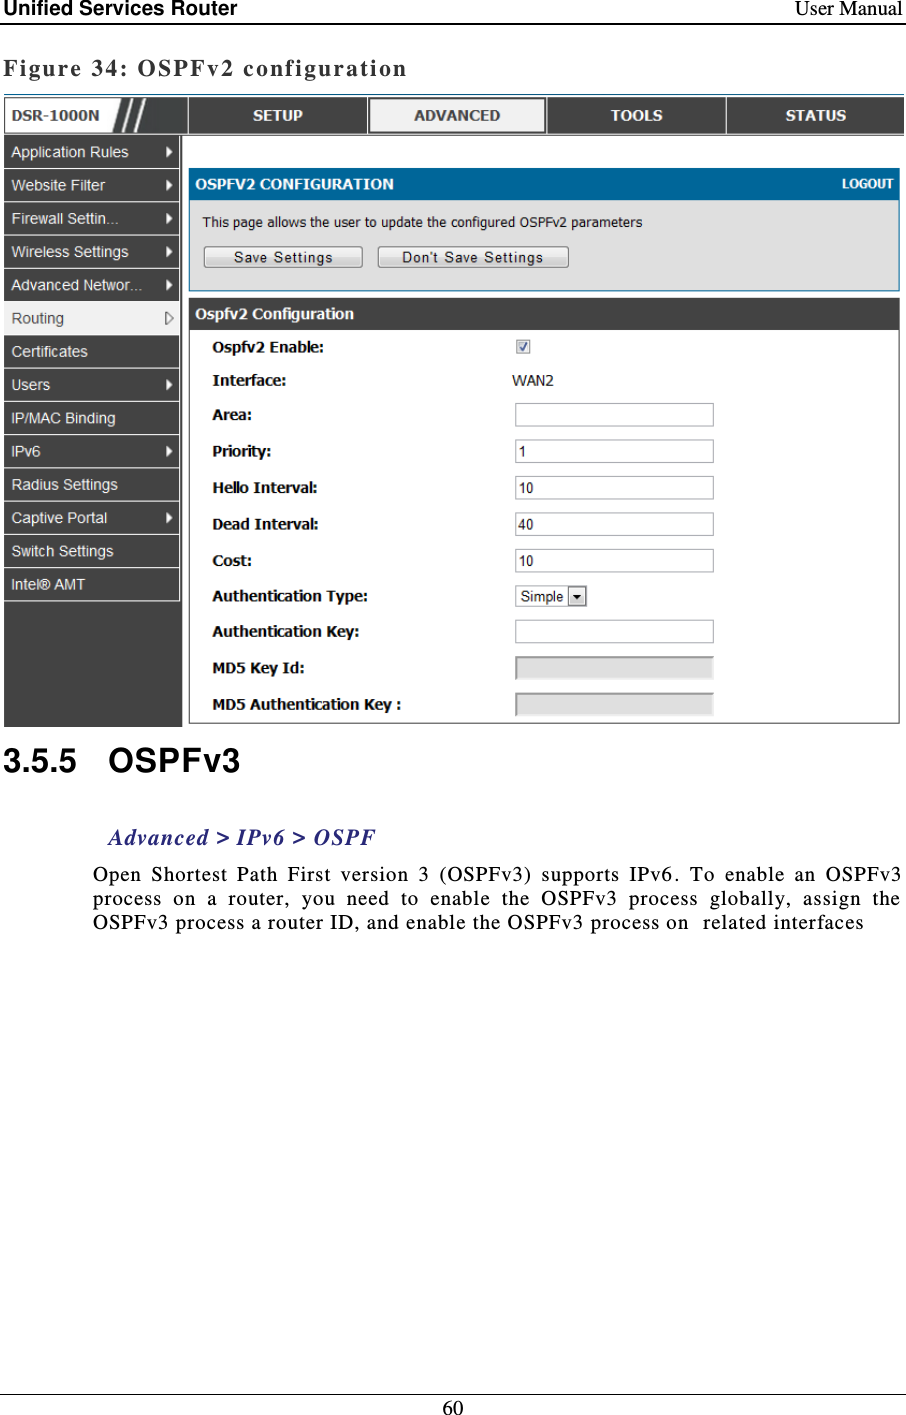 Unified Services Router    User Manual 60  Figure 34: OSPFv2 configurati on   3.5.5  OSPFv3 Advanced &gt; IPv6 &gt; OSPF Open  Shortest  Path  First  version  3  (OSPFv3)  supports  IPv6 .  To  enable  an  OSPFv3 process  on  a  router,  you  need  to  enable  the  OSPFv3  process  globally,  assign  the OSPFv3 process a router ID, and enable the OSPFv3 process on  related interfaces 